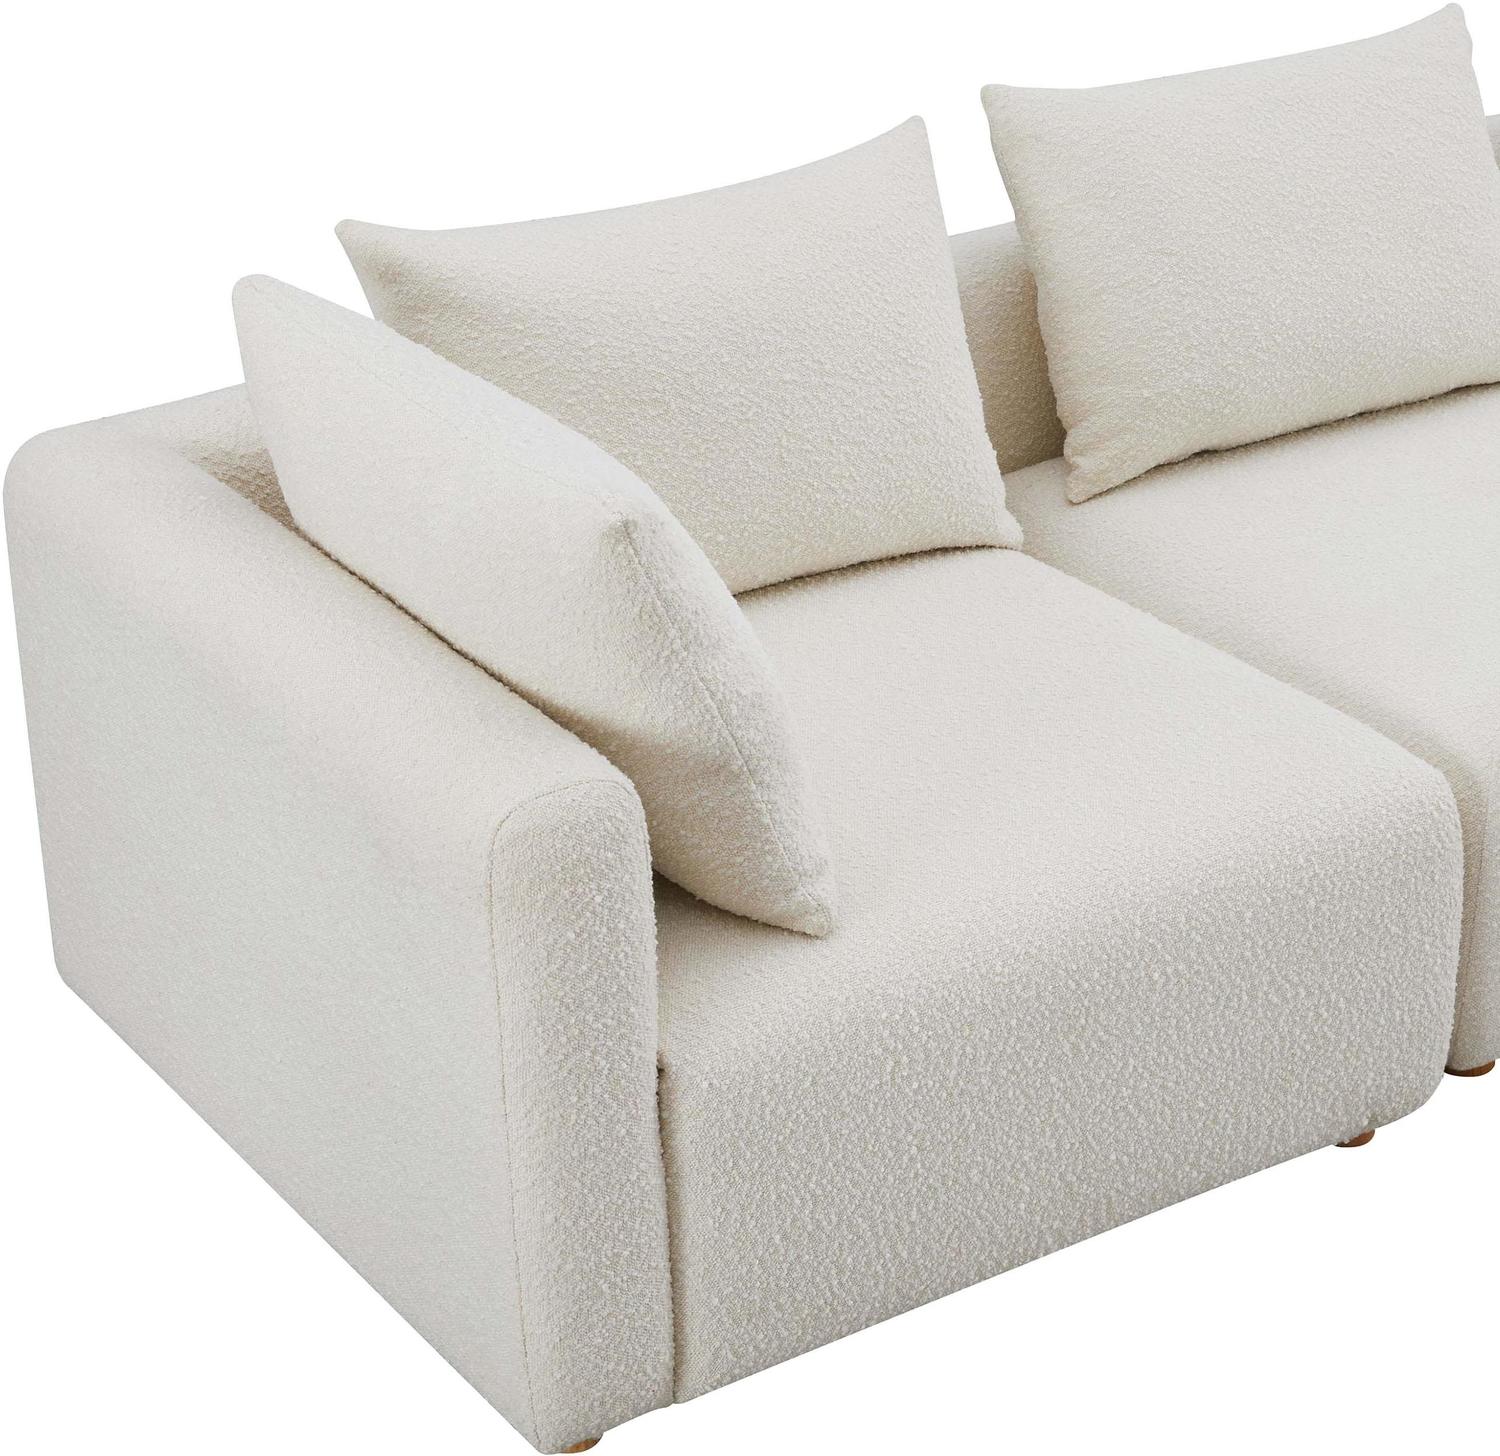 quality sectional couches Contemporary Design Furniture Sectionals Cream